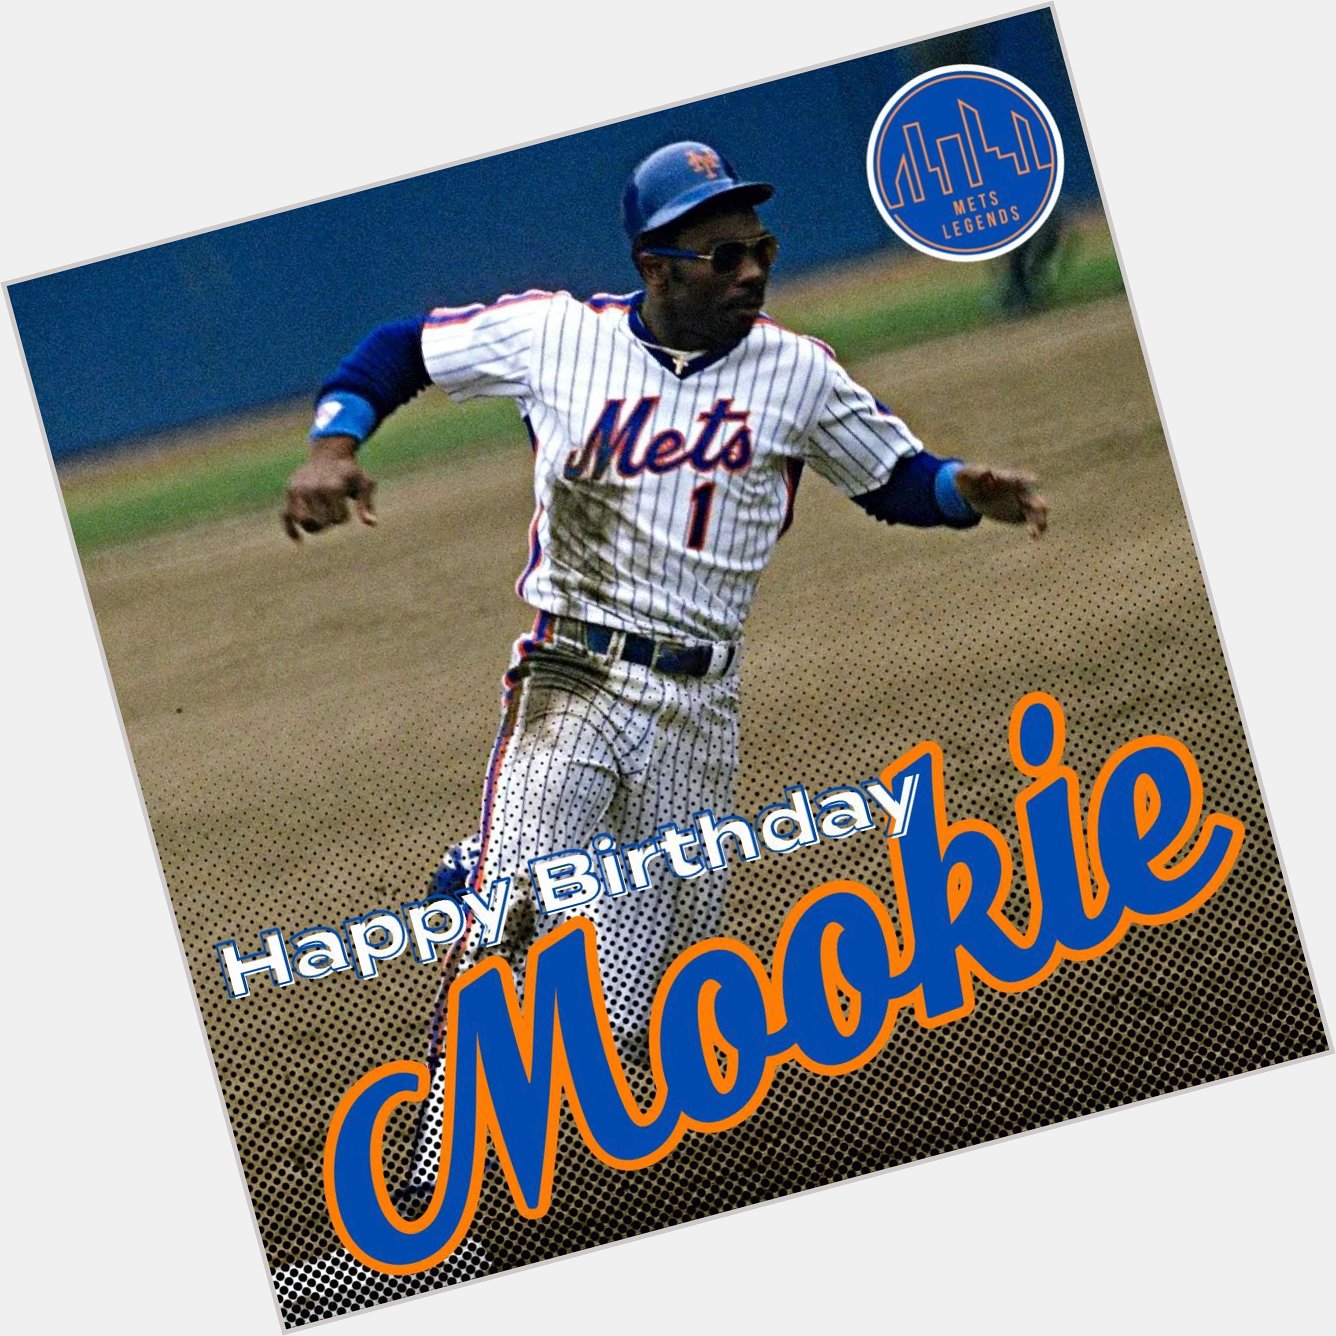 Happy Birthday, Mookie Wilson!

The awesome outfielder turns 66-years-old today!  